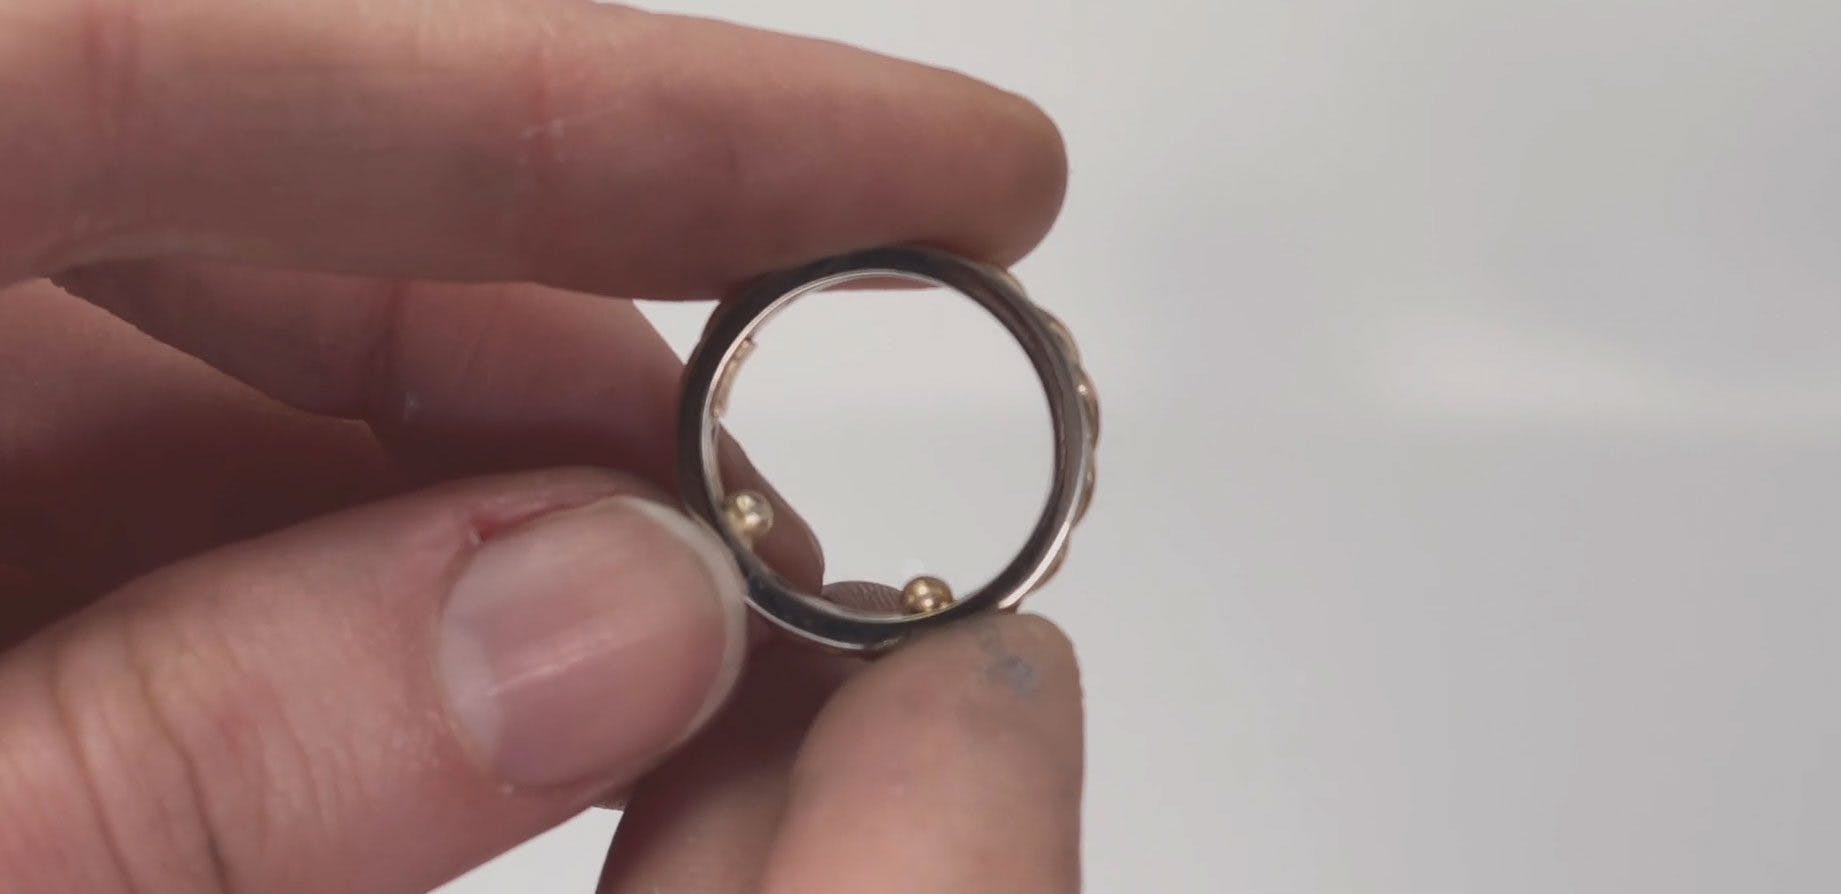 How to Make Sizing Beads to Size a Ring Down